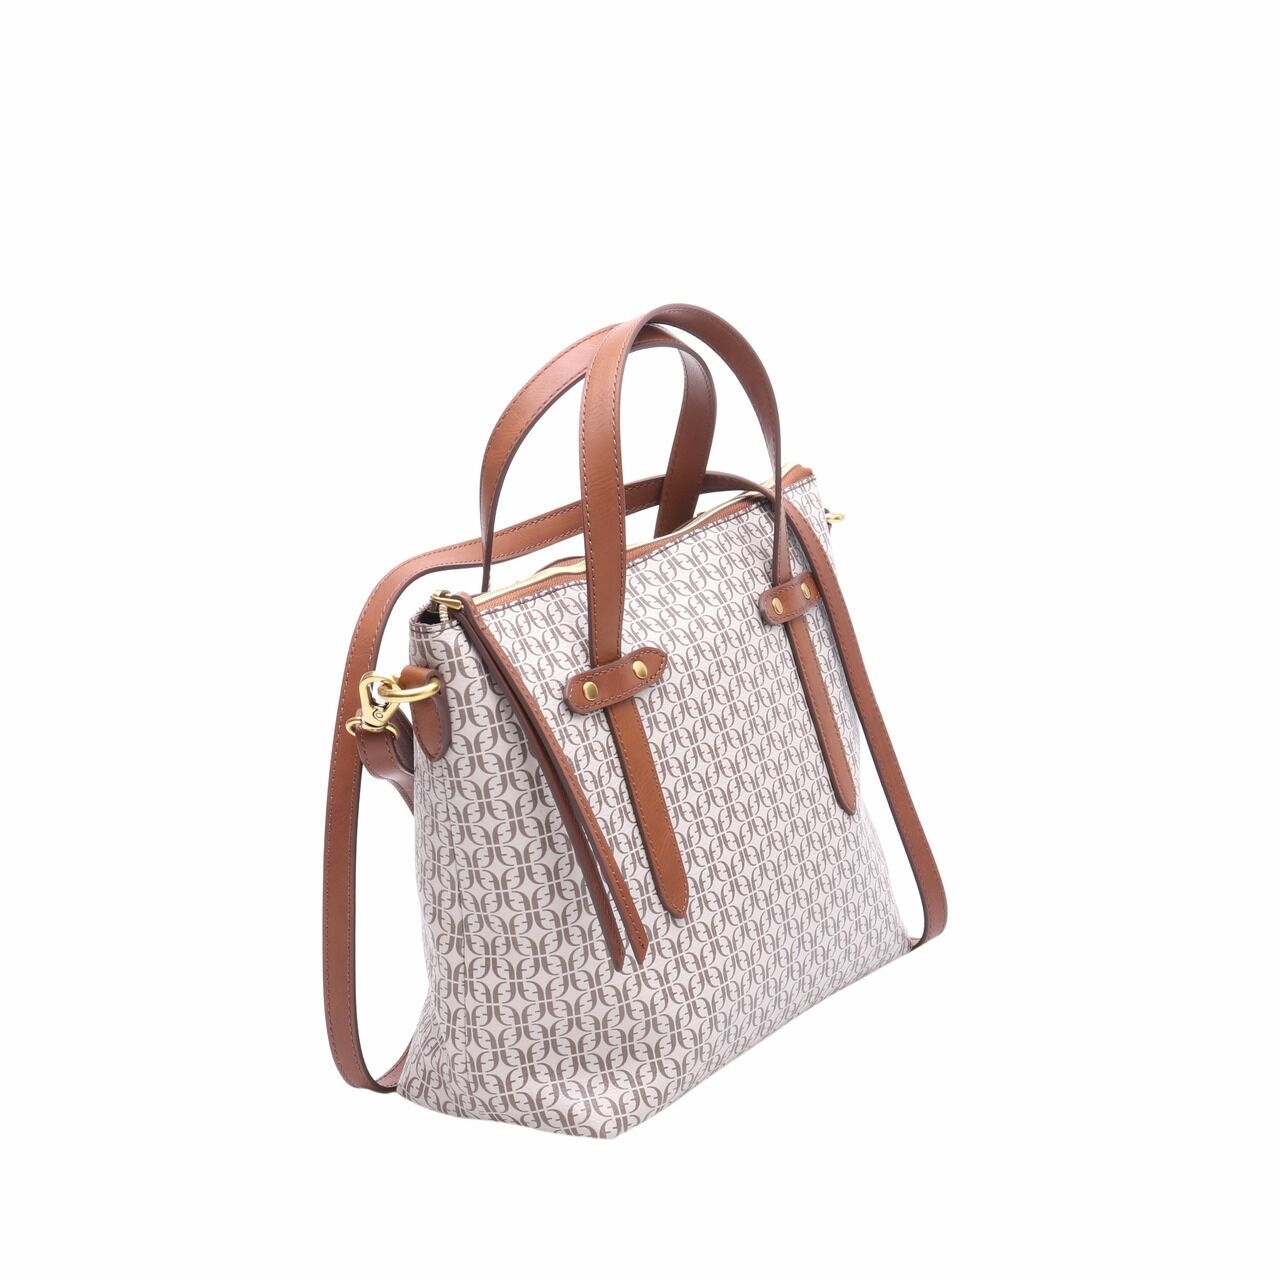 Fossil Felicity Taupe Tan Satchel Bag